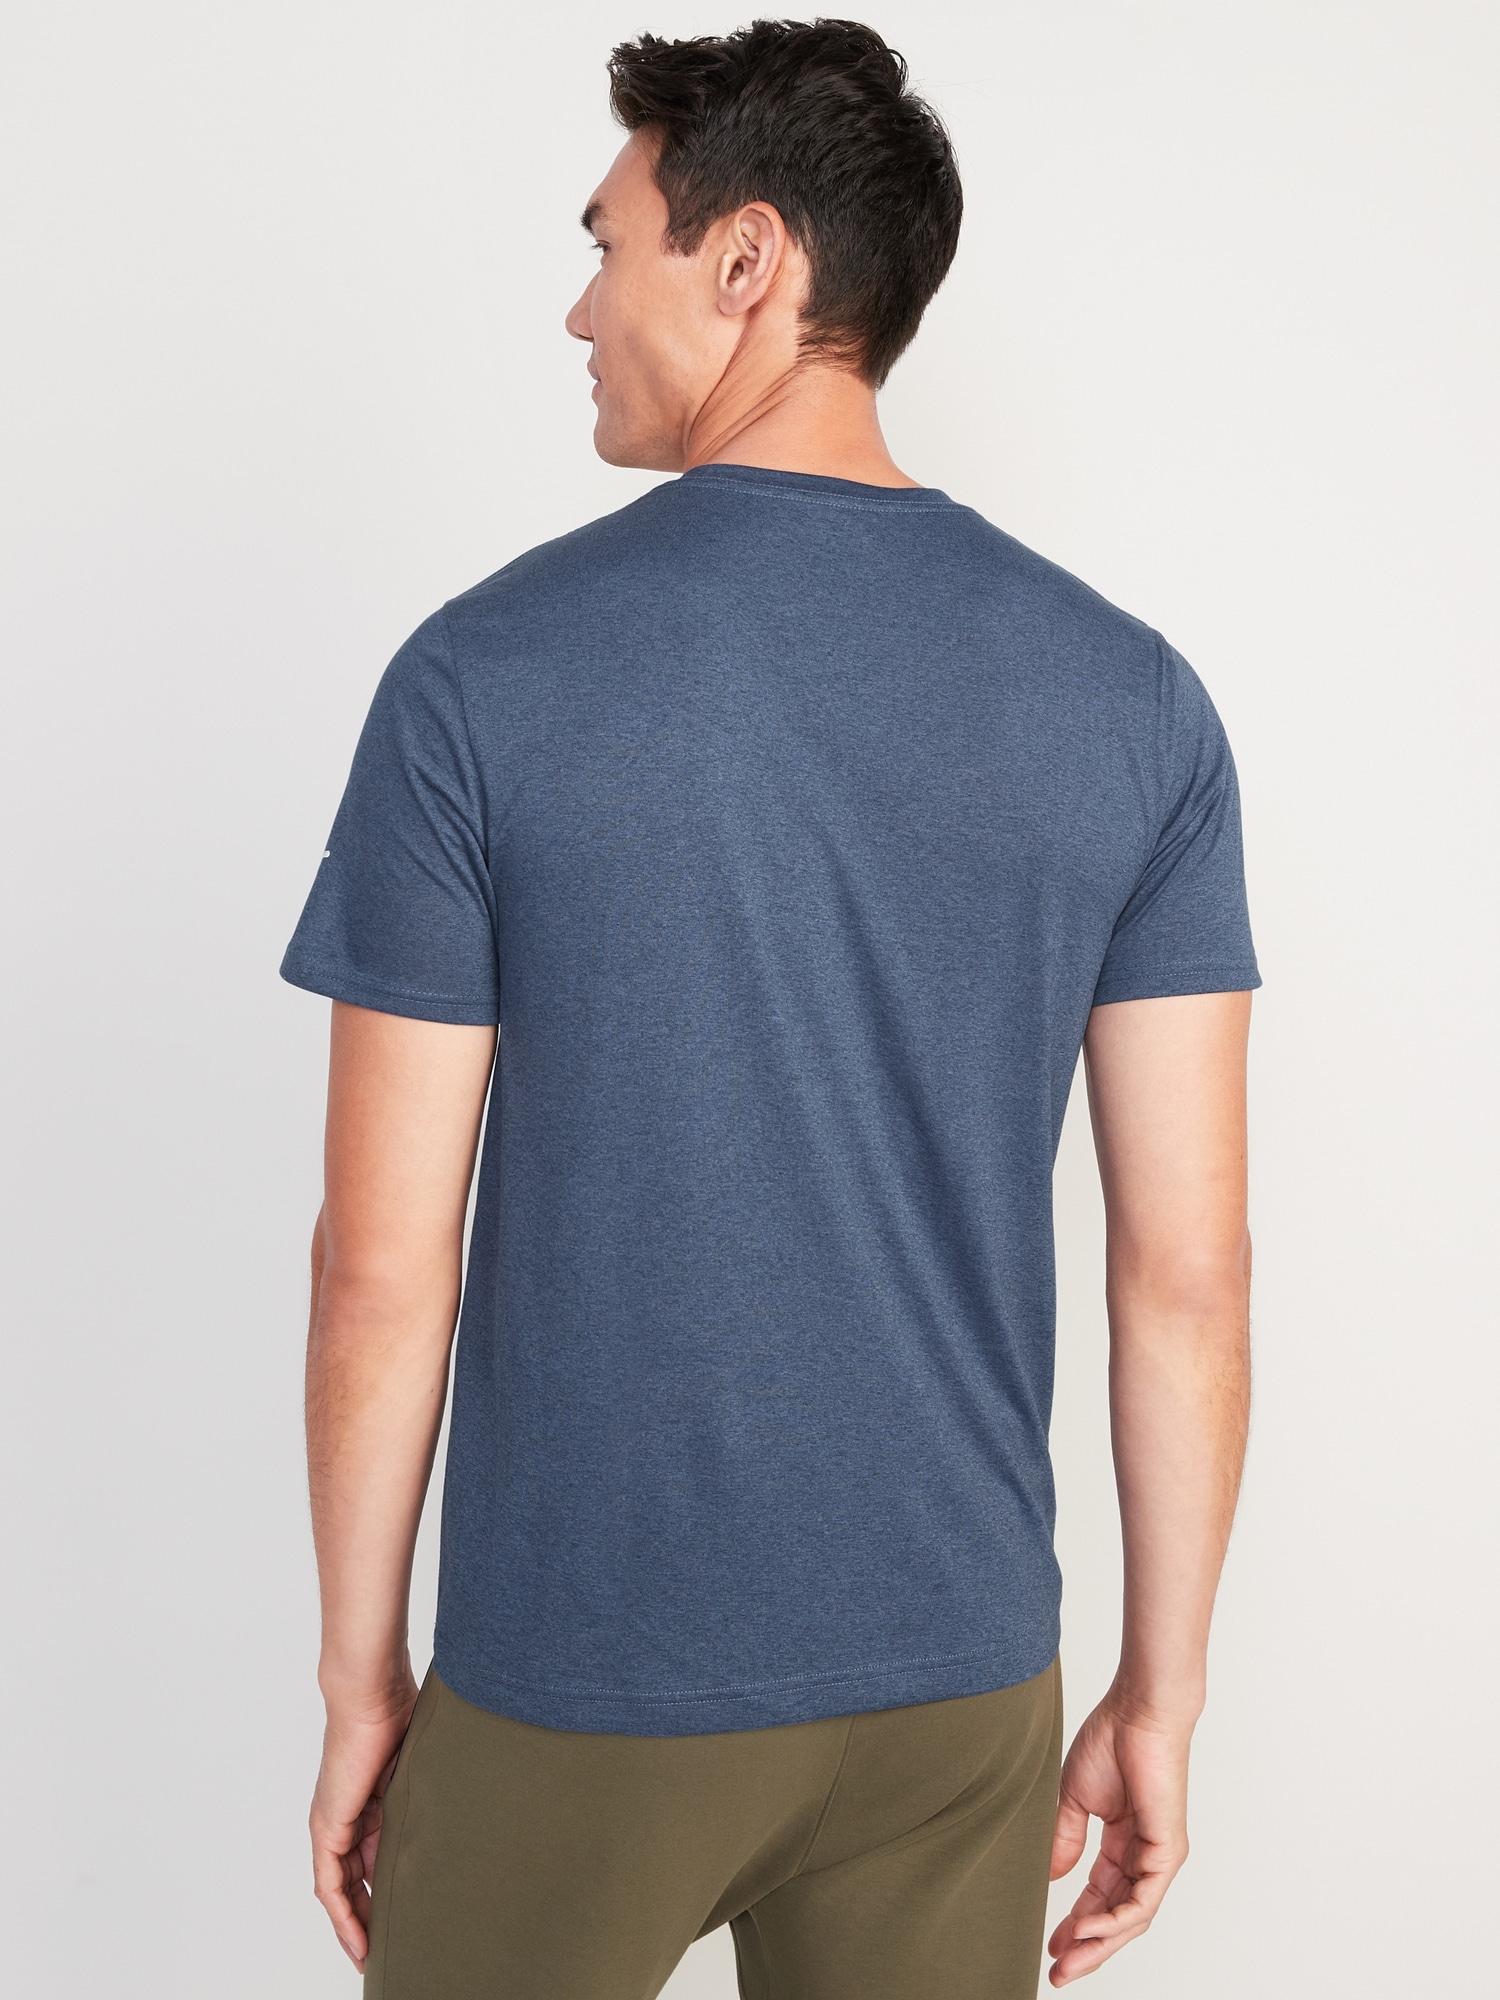 Go-Dry Cool Odor-Control Core T-Shirt for Men | Old Navy